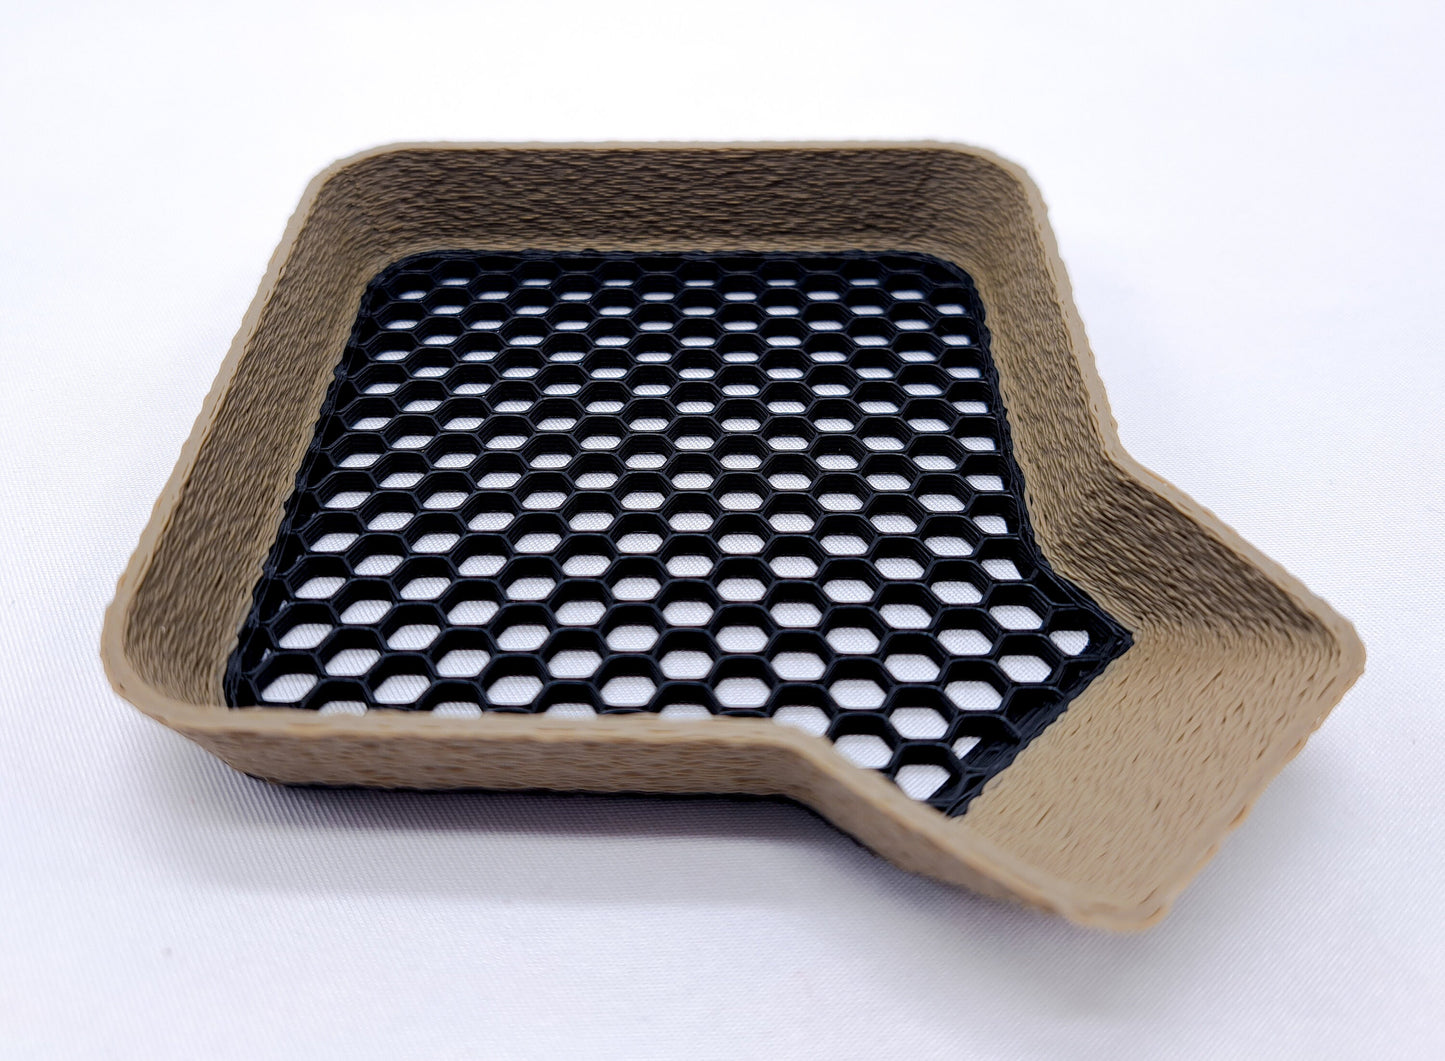 Customizable Stackable Trays for Games, Jewelry, or Small Items